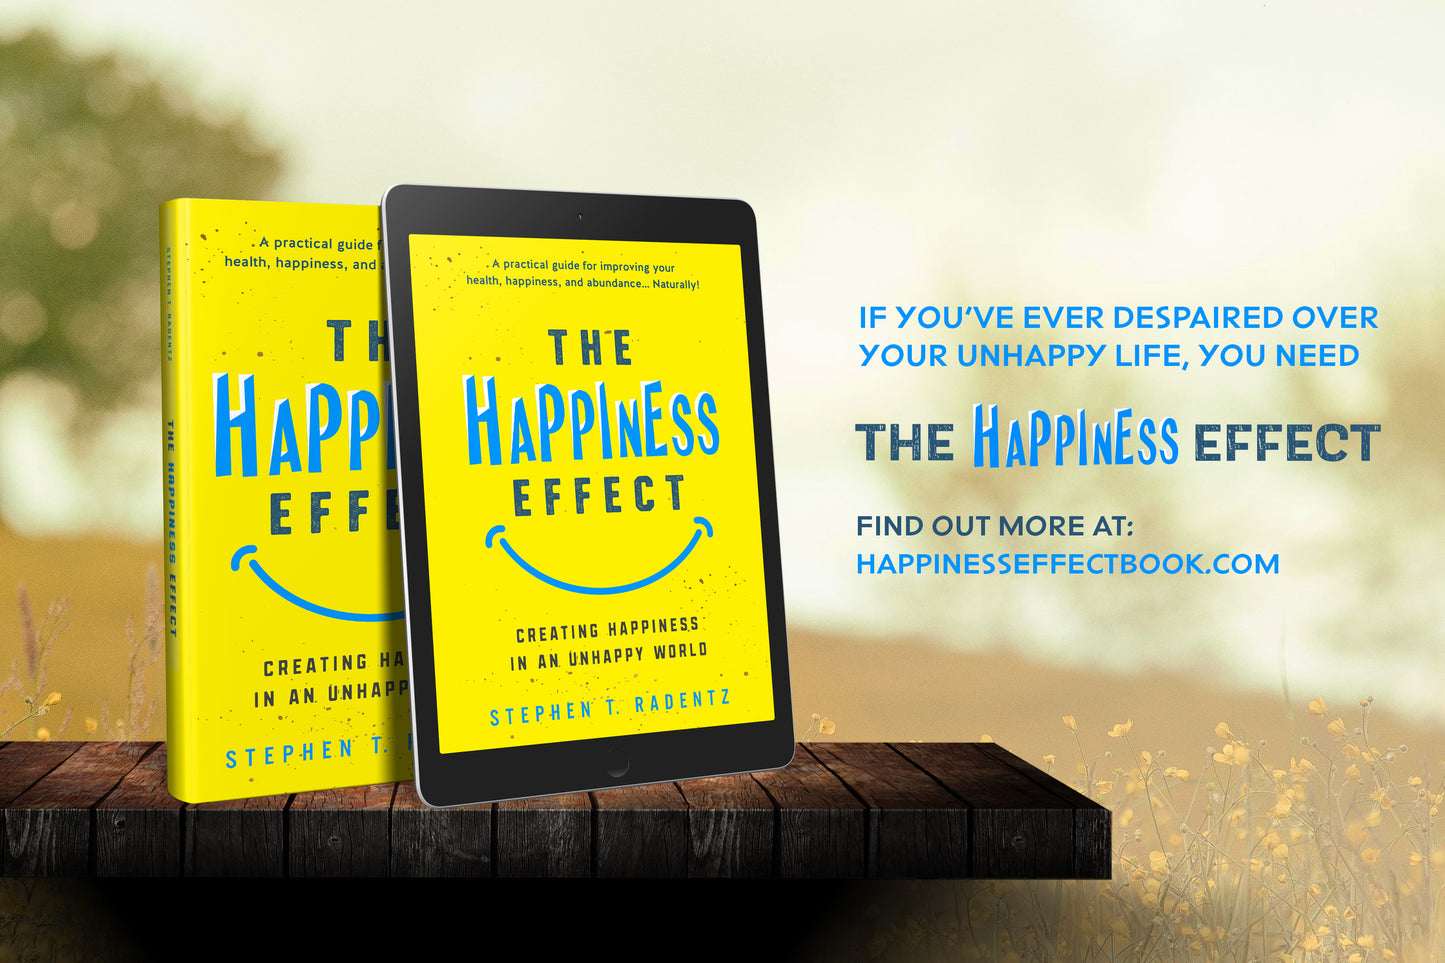 THE HAPPINESS EFFECT  (Hardcover Edition)